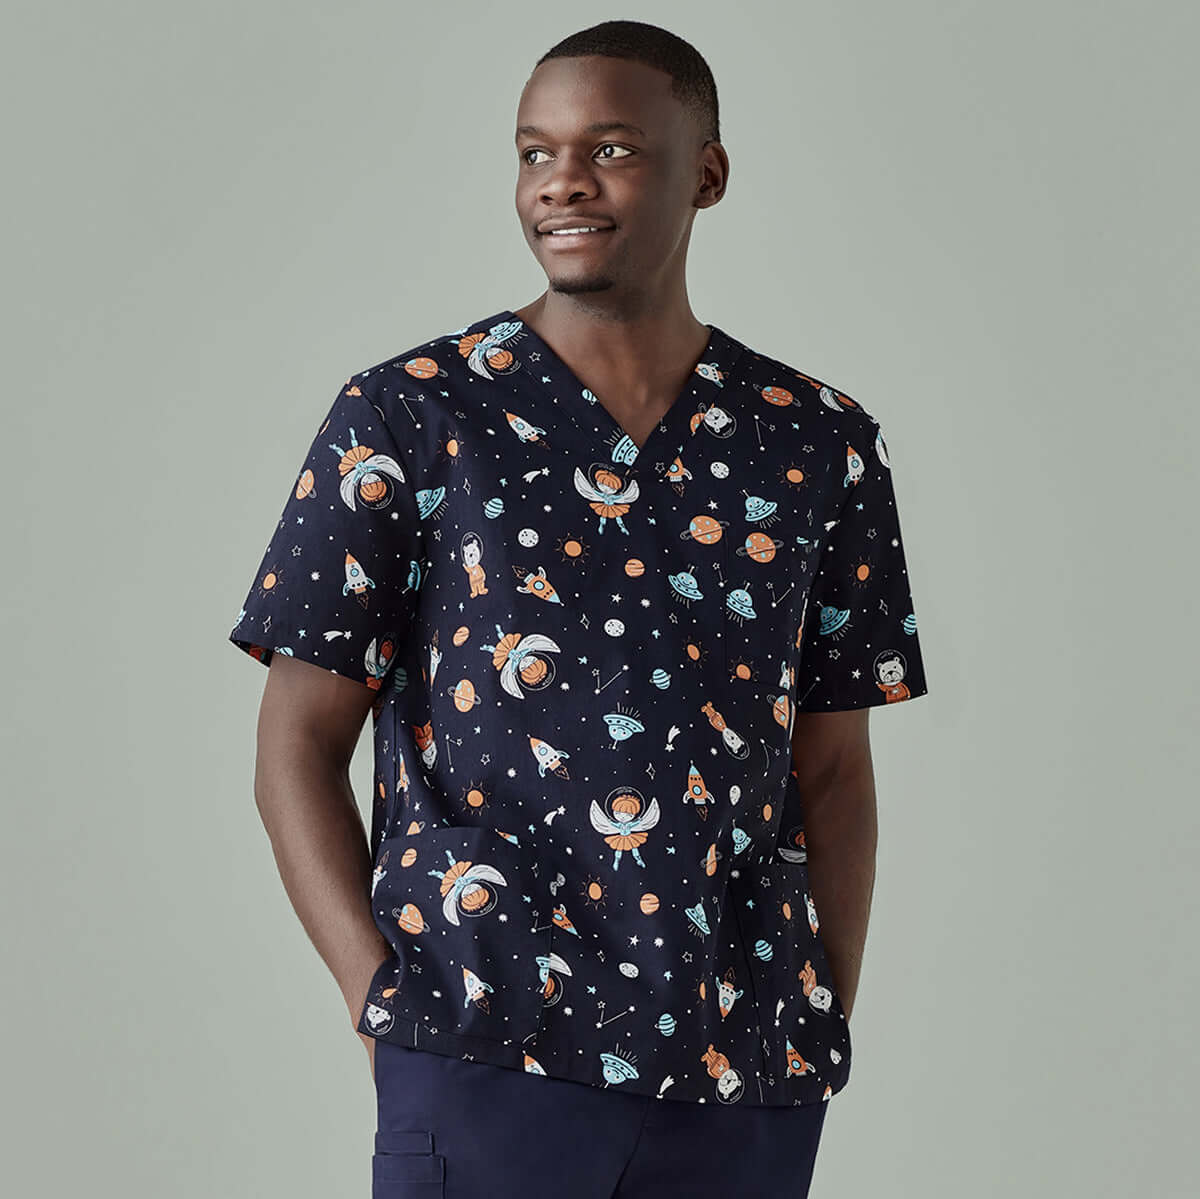 Mens Printed Scrub Top - Space Party